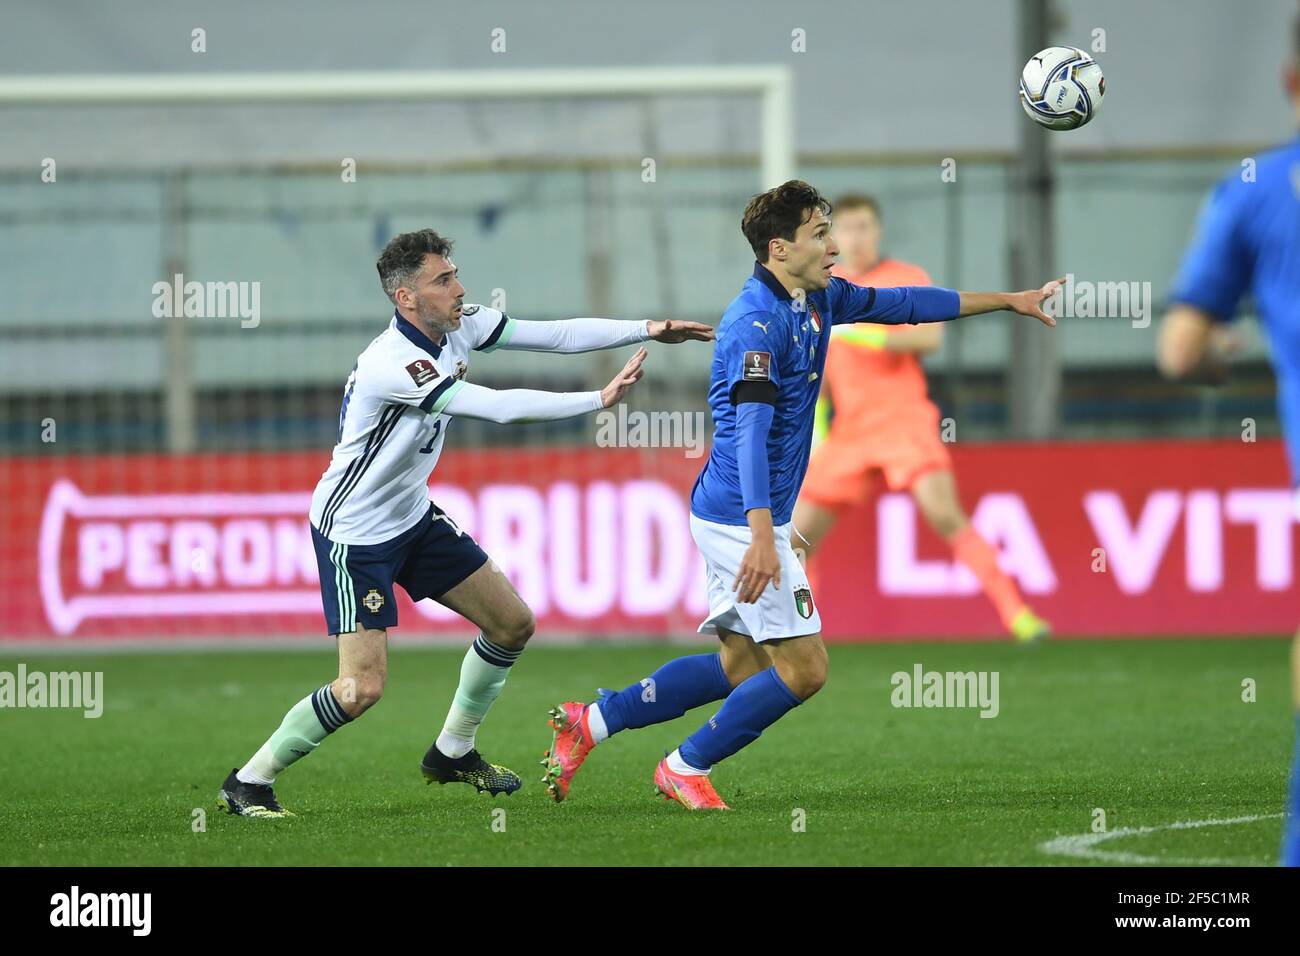 Parma, Italy. March 25 2021: Federico Chiesa (Italy)Michael Smith (Northern Ireland) during the Fifa 'World Cup Qatar 2022 qualifying' match between Italy 2-0 Northern Ireland at Ennio Tardini Stadium on March 25, 2021 in Parma, Italy. Credit: Maurizio Borsari/AFLO/Alamy Live News Stock Photo